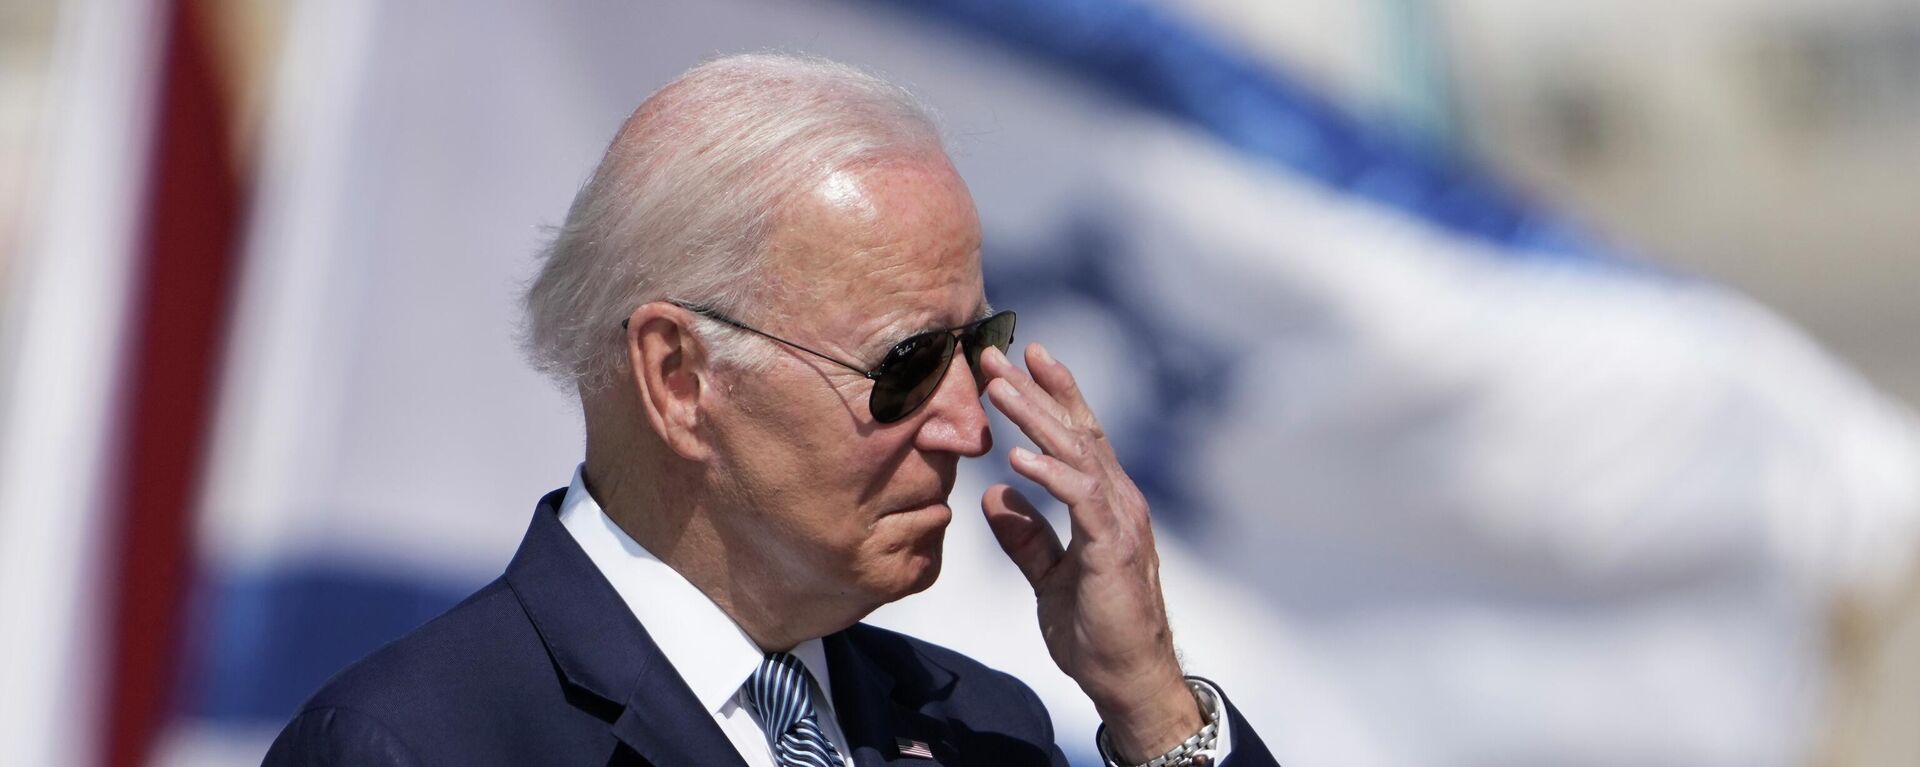 President Joe Biden adjusts his glasses during a welcoming ceremony upon his arrival at Ben Gurion International Airport near Tel Aviv, Israel Wednesday, July 13, 2022. Biden arrives in Israel on Wednesday for a three-day visit, his first as president.  - Sputnik International, 1920, 14.07.2022